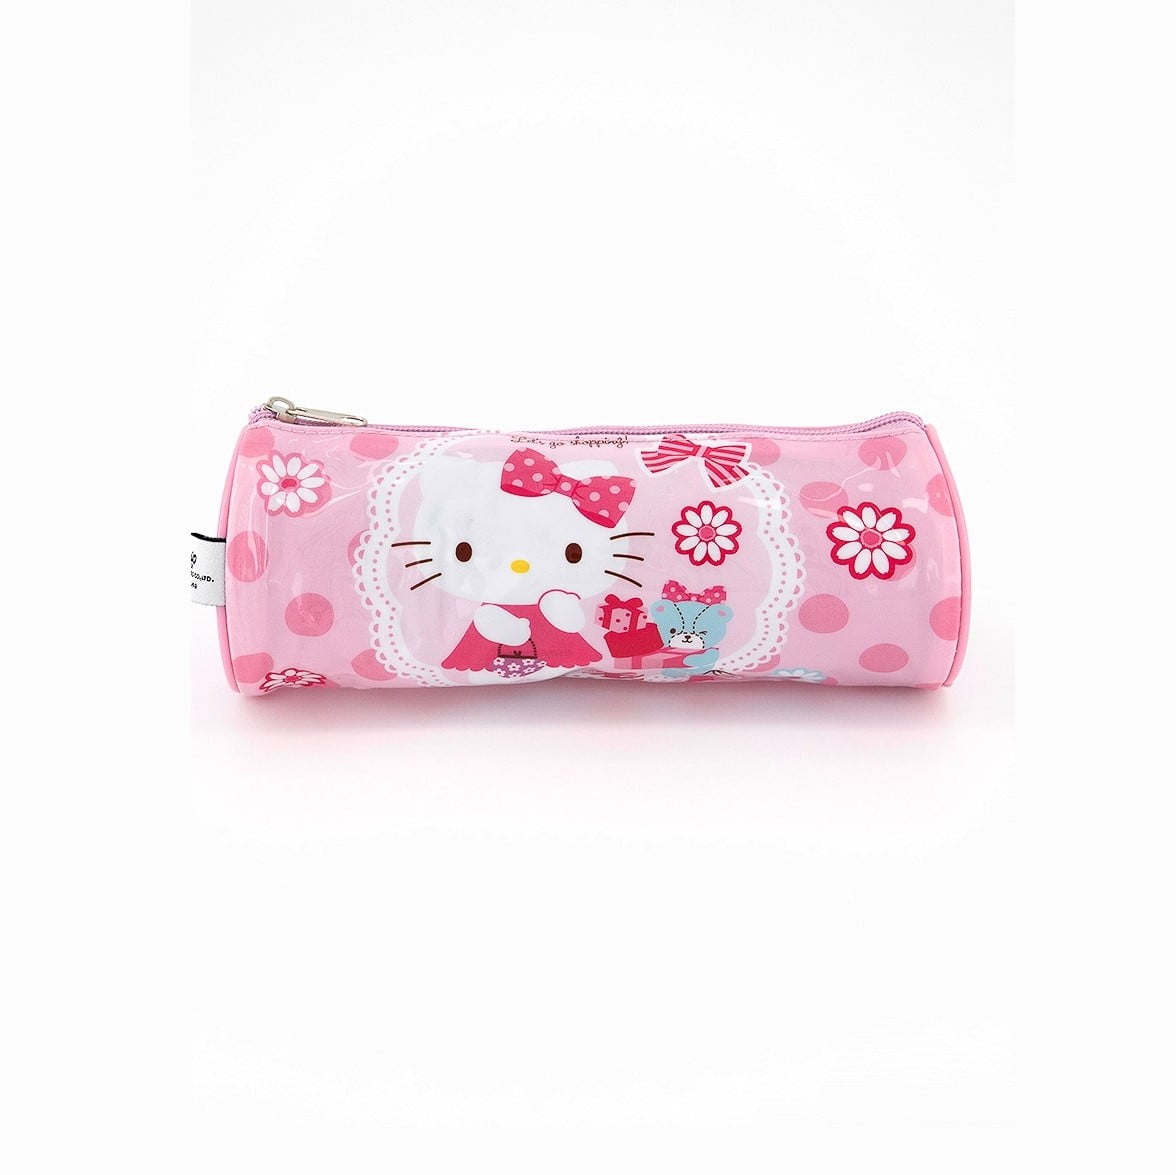 1860425375089 Front Raw 1 Rainbow Max &Lt;H1&Gt;Hello Kitty Girls Combo Gift-Pack (Back To School)&Lt;/H1&Gt; The Trolley Bag Is A Reliable Companion For Your Journey. The Trolley Features A Main Zip Compartment To Keep Your Child'S Belonging Or School Items. The Trolley Has A Comfortable Handle On The Top. This Hello Kitty Coloring Book Contains 16 Sheets Of Themed Characters To Color In. It Also Has 8 Pages, 2 Stickers. A Beautiful Coloring Book For Your Little One. Kids Will Have The Perfect Time At School With These School Accessories.  The Hello Kitty Aluminum Water Is Highly Fashionable And Practical! You Heard That Right A Travel Water Bottle That Is Amazingly Trendy And Is Made To Last A Lifetime. This Bottle Will Keep Your Beverage Of Choice Hot Or Cold For Hours. Get Your Kids Ready To Go Back To School With This Premium Pencil Case That Keeps Their Pencils, Markers &Amp; More Ready For Quick Access. Back To School Hello Kitty Girls Combo Gift-Pack